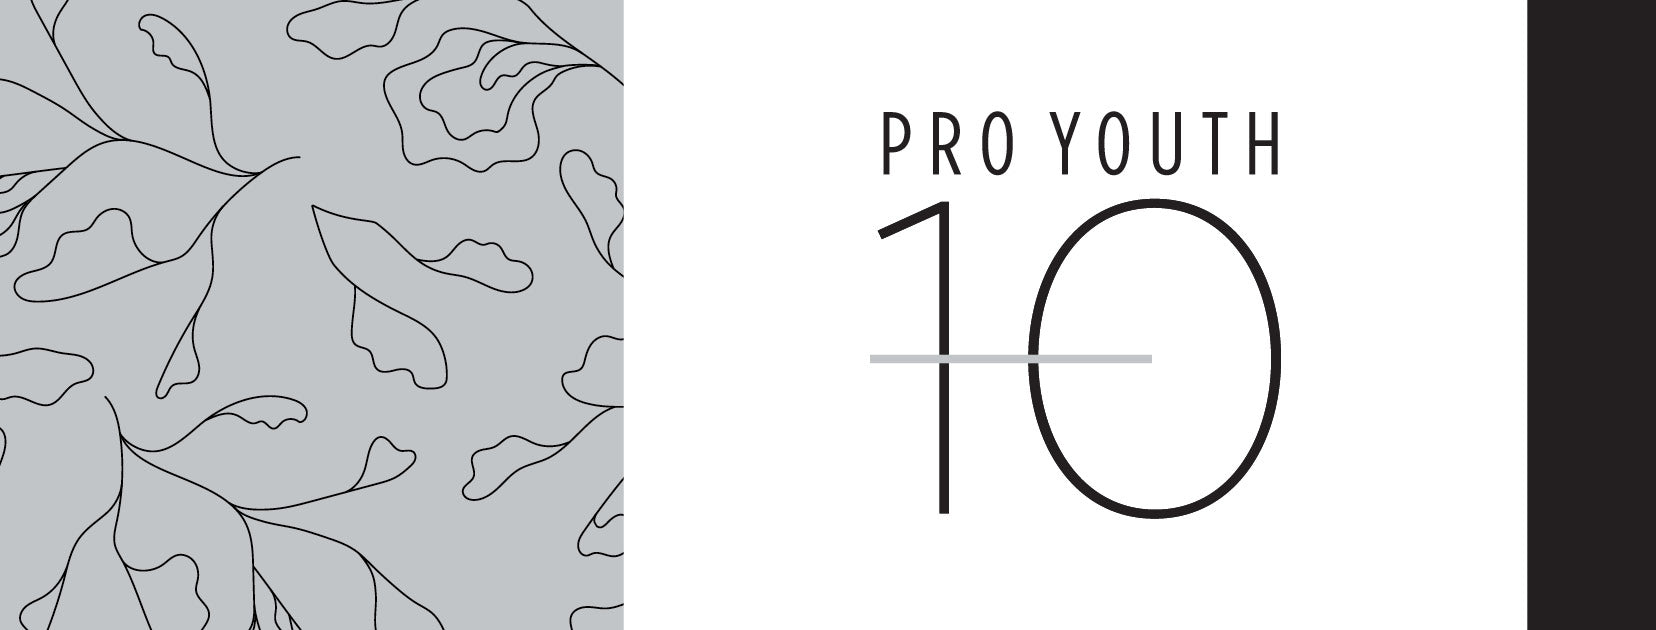 Pro Youth -10 Epidermal Growth Factors